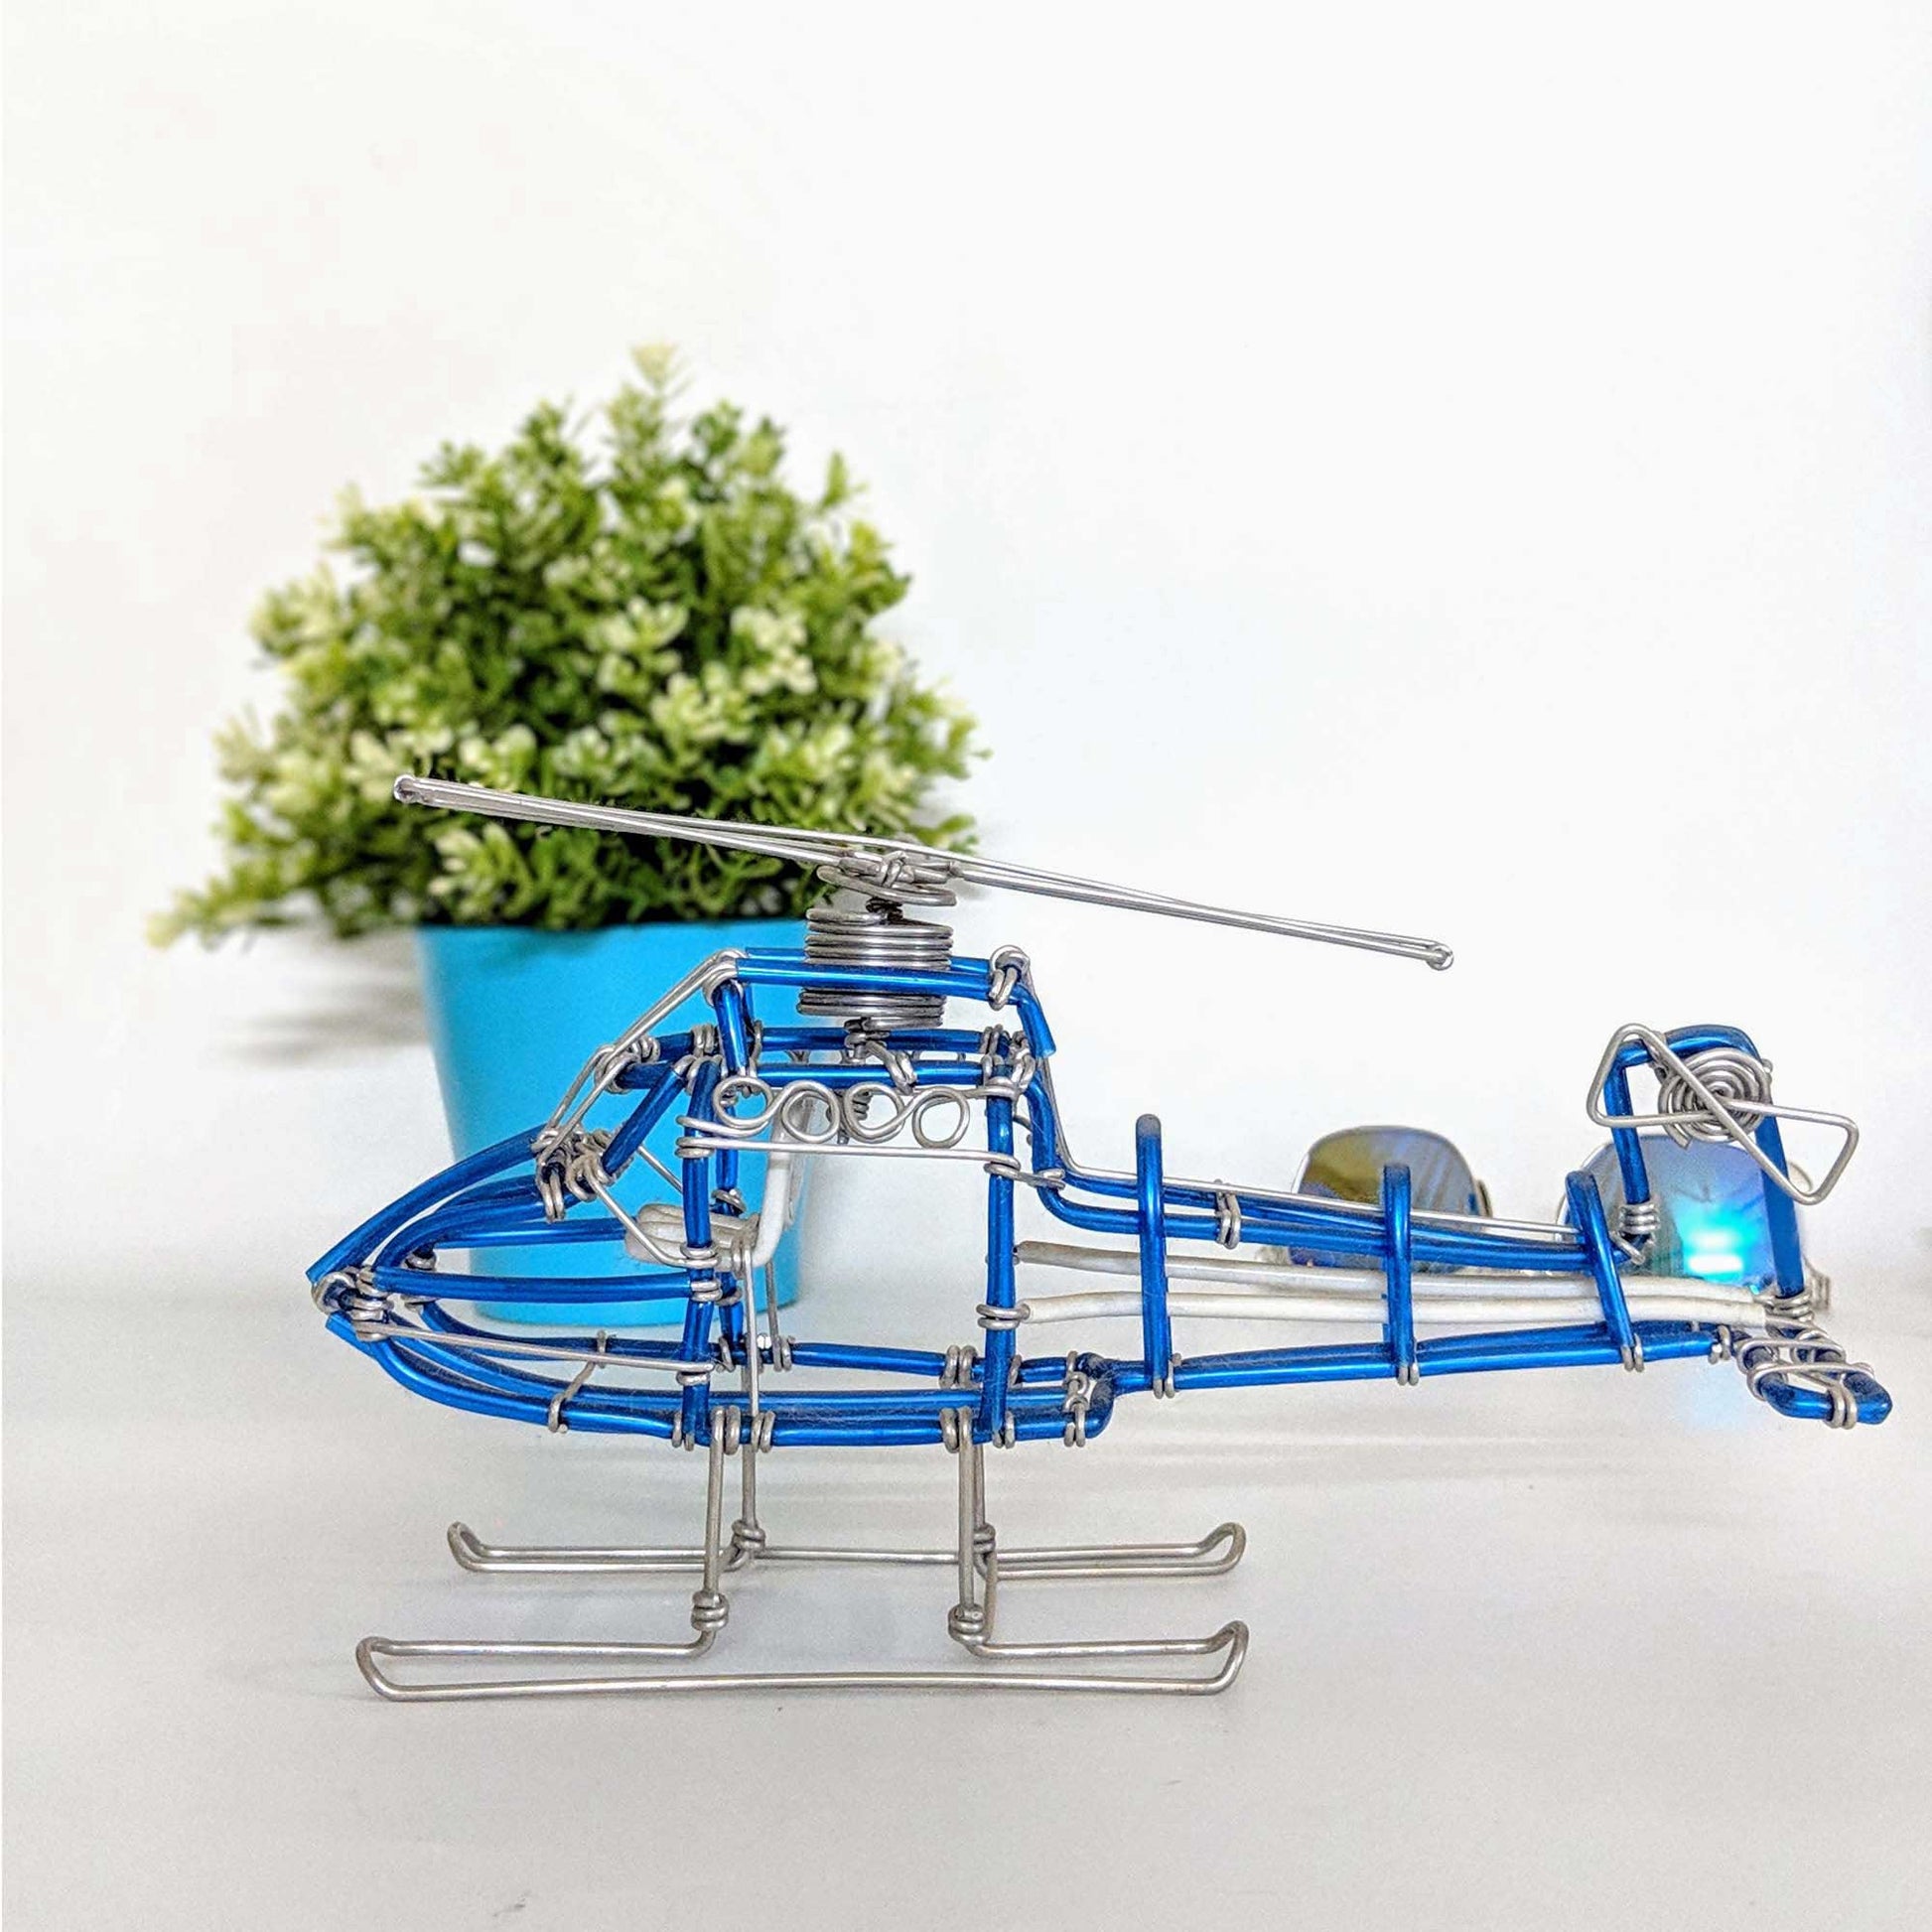 Miniature Wire Art Helicopter hand-crafted from aluminium wire